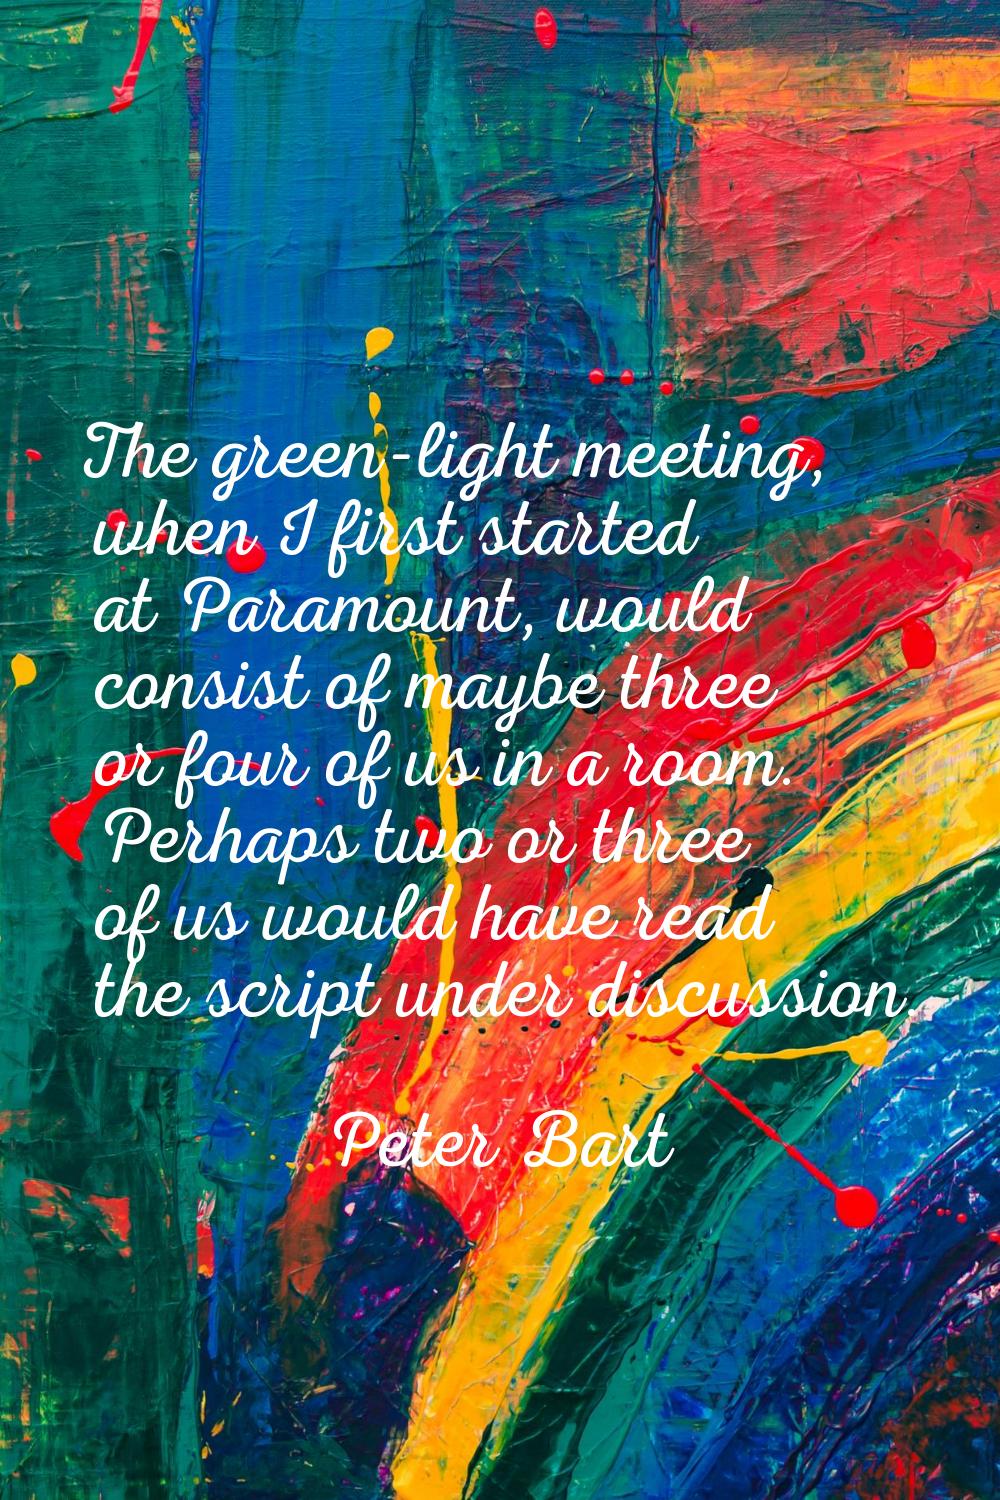 The green-light meeting, when I first started at Paramount, would consist of maybe three or four of